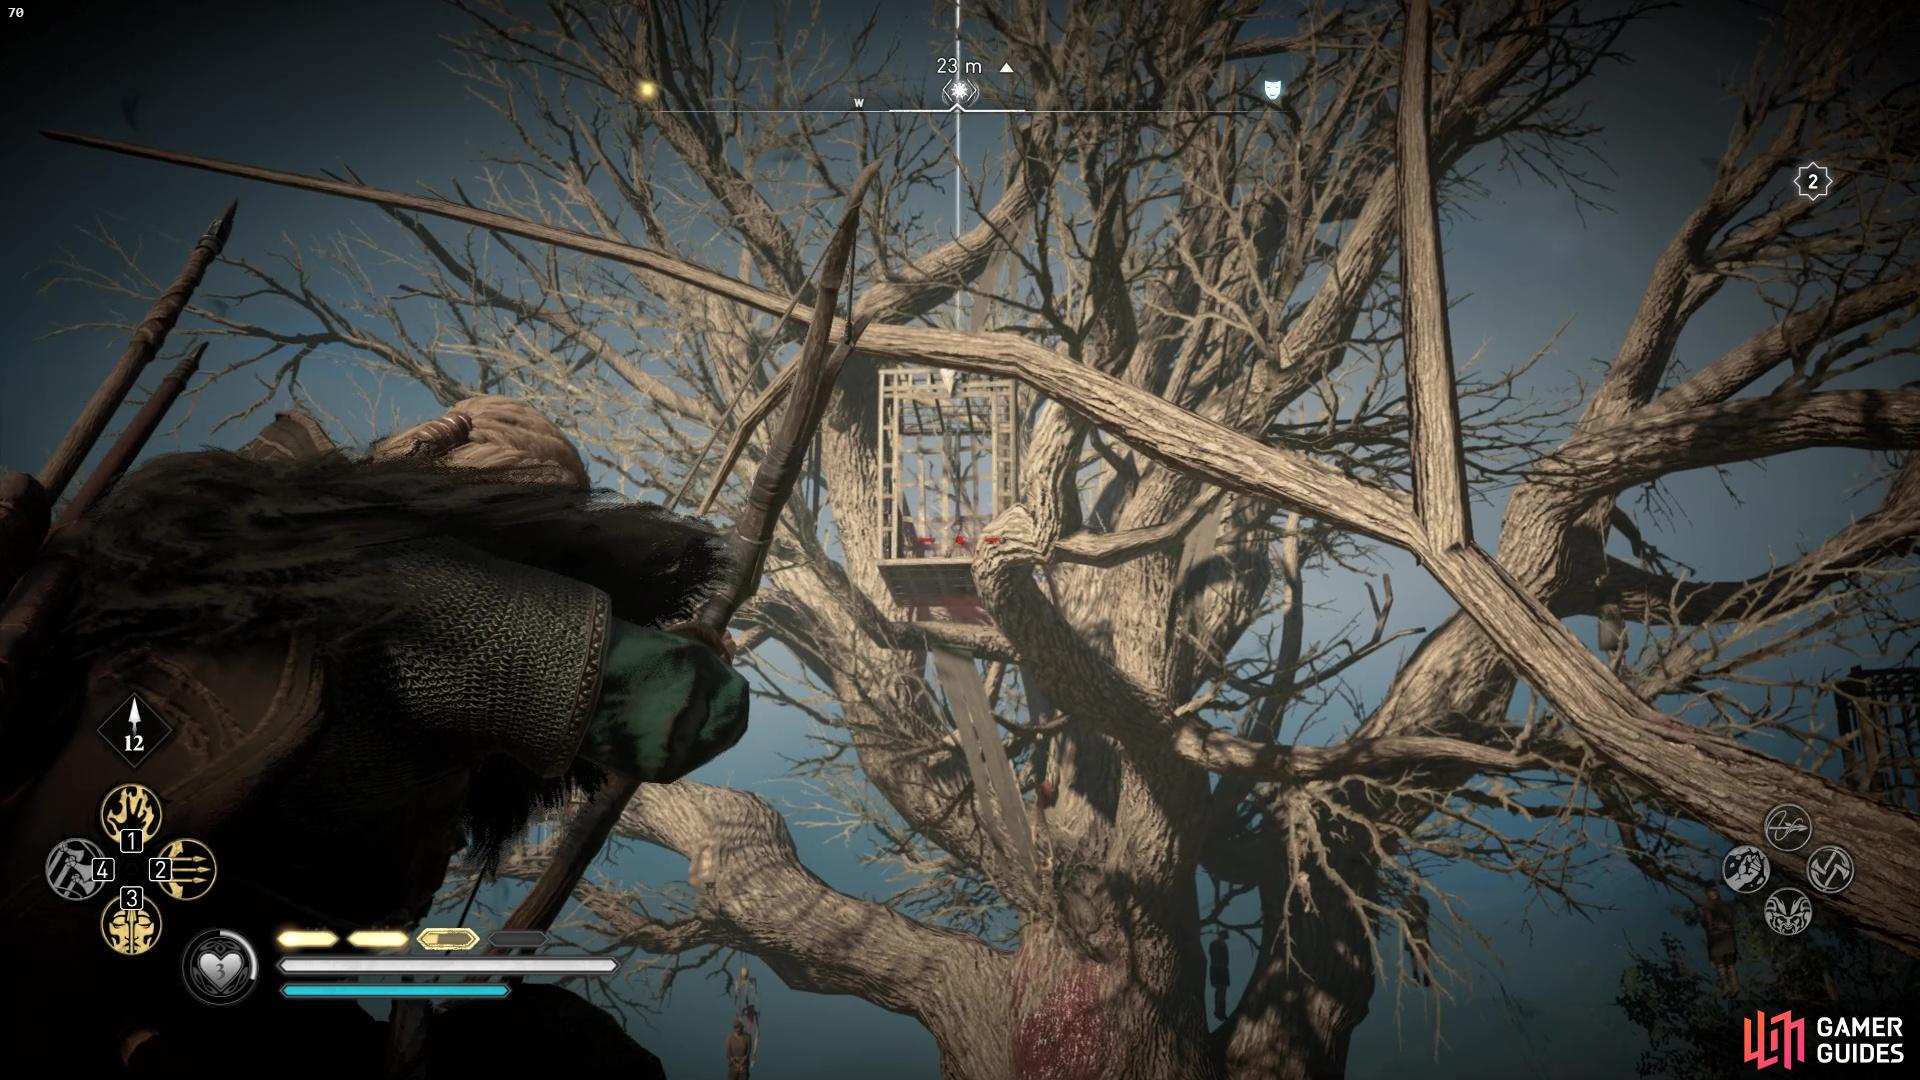 When youre at the end of the line of trees, use your bow to shoot down the cursed symbol.